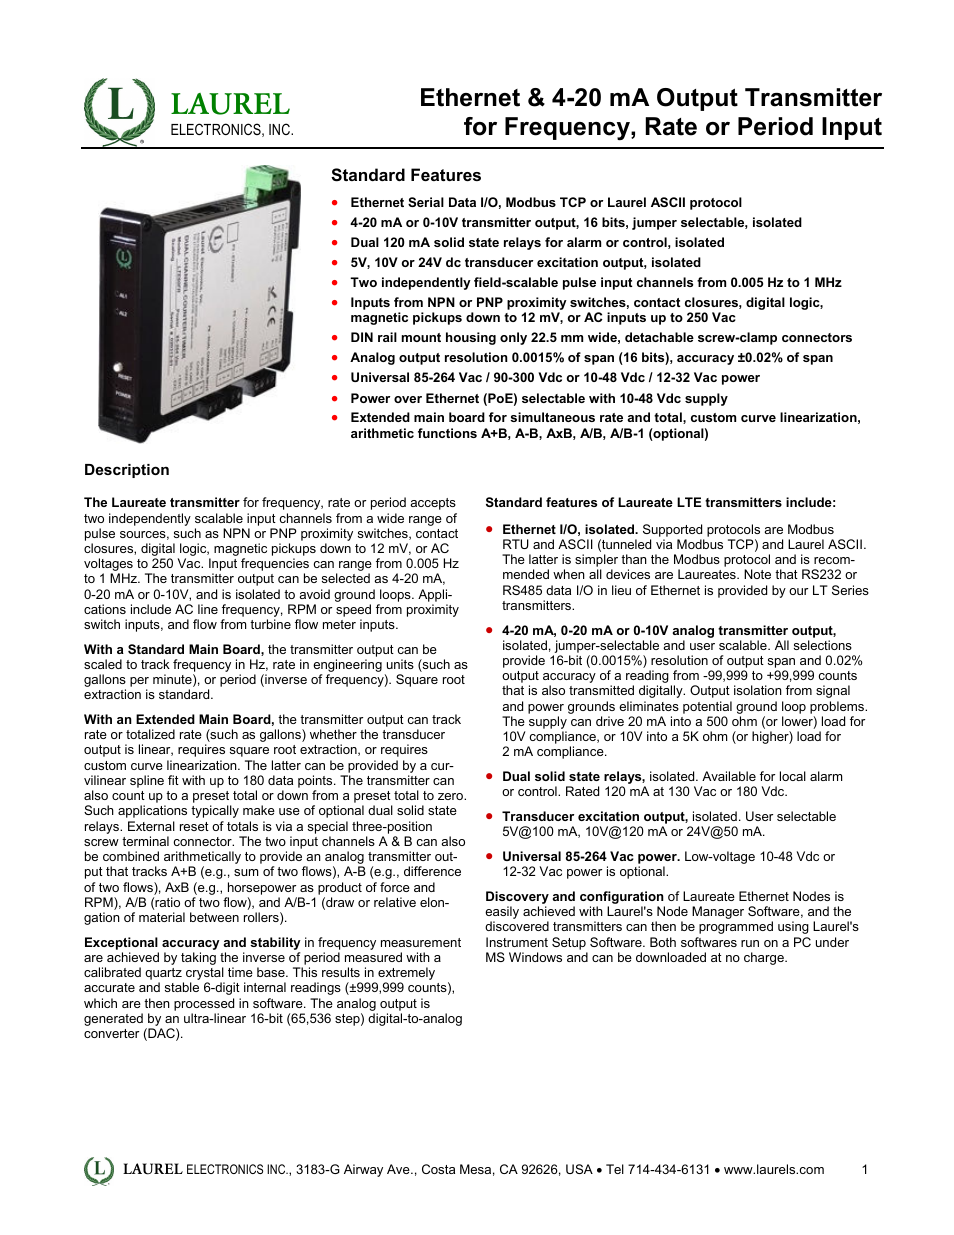 LTE: Ethernet & 4-20 mA Output Transmitter for Frequency, Rate or Period Input